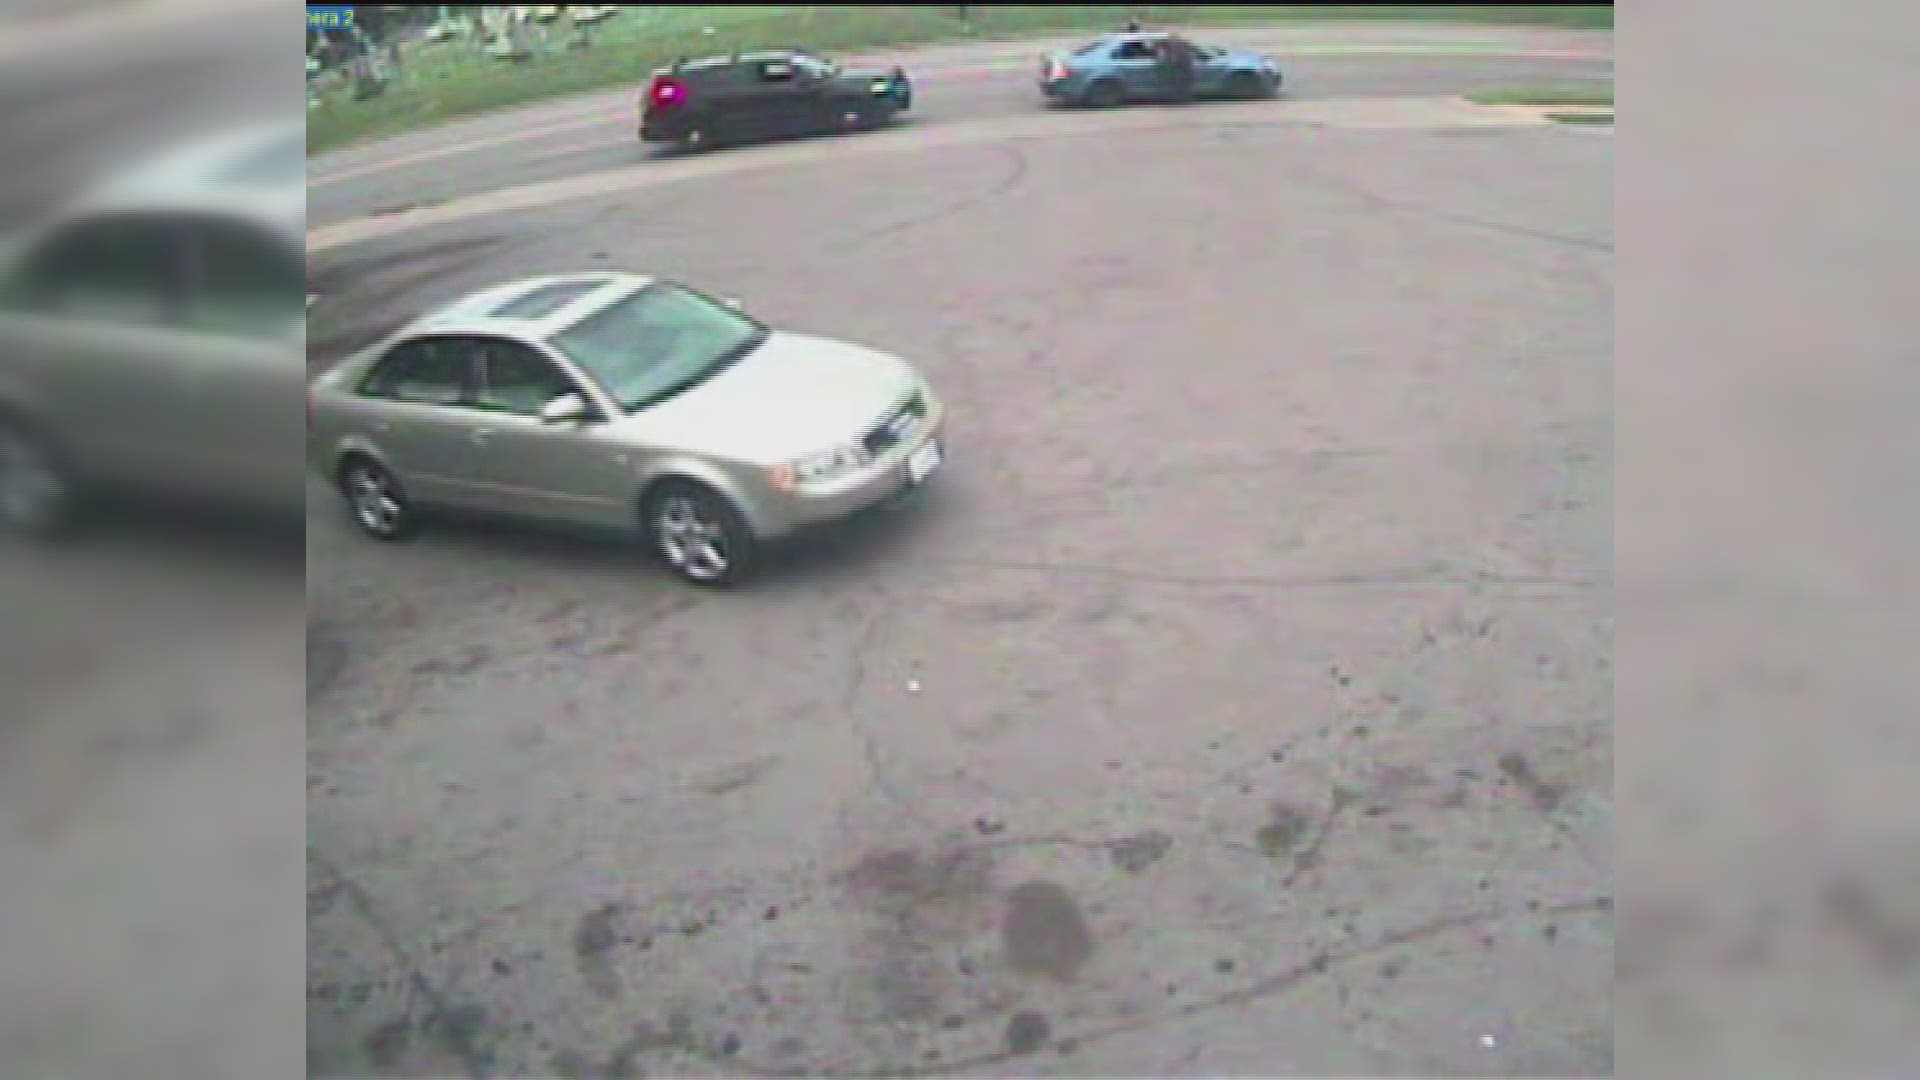 Toledo police released dashcam and surveillance footage of the traffic stop that went viral.